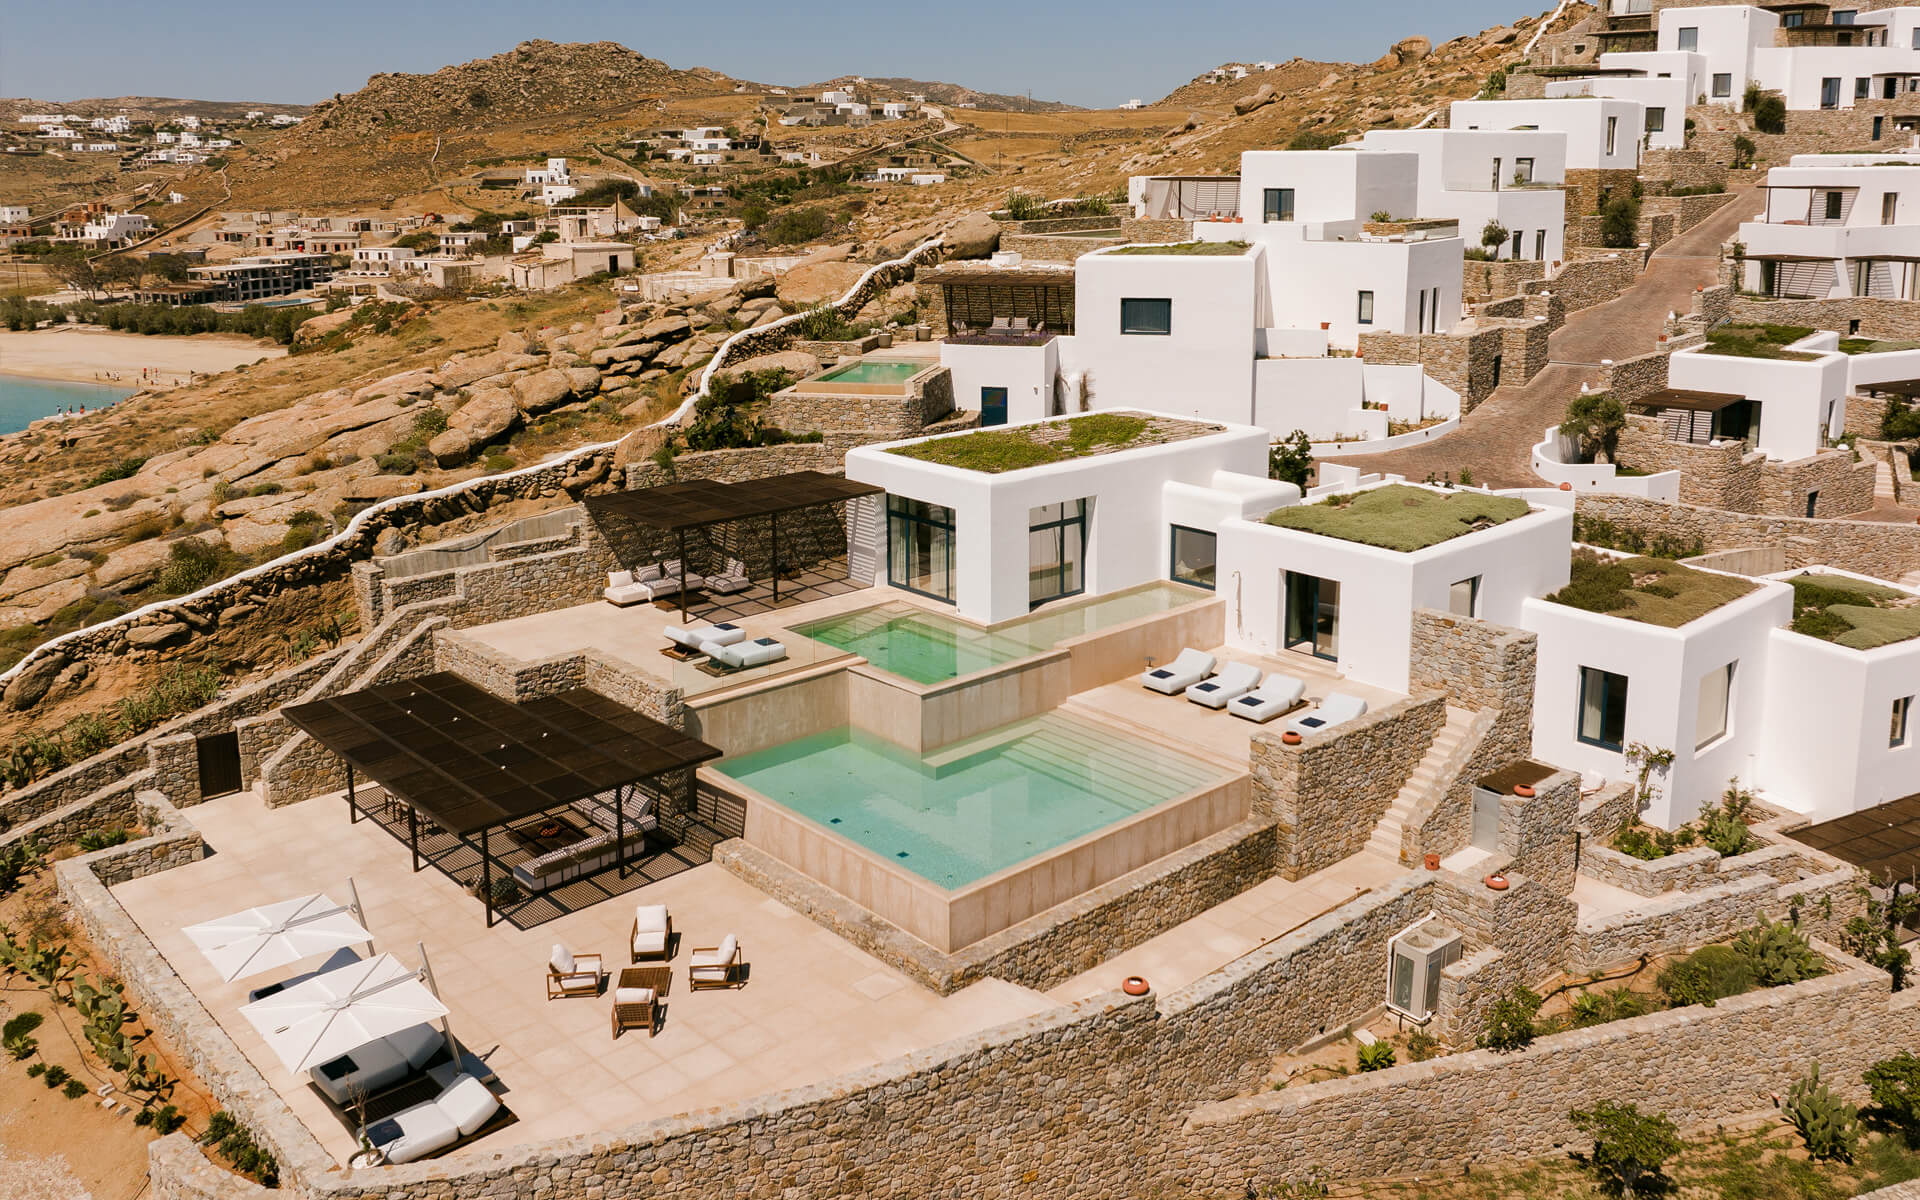 Villa Calliope exterior: Stunning luxury villa with two swimming pools and private terraces, set in a serene Mykonos landscape.